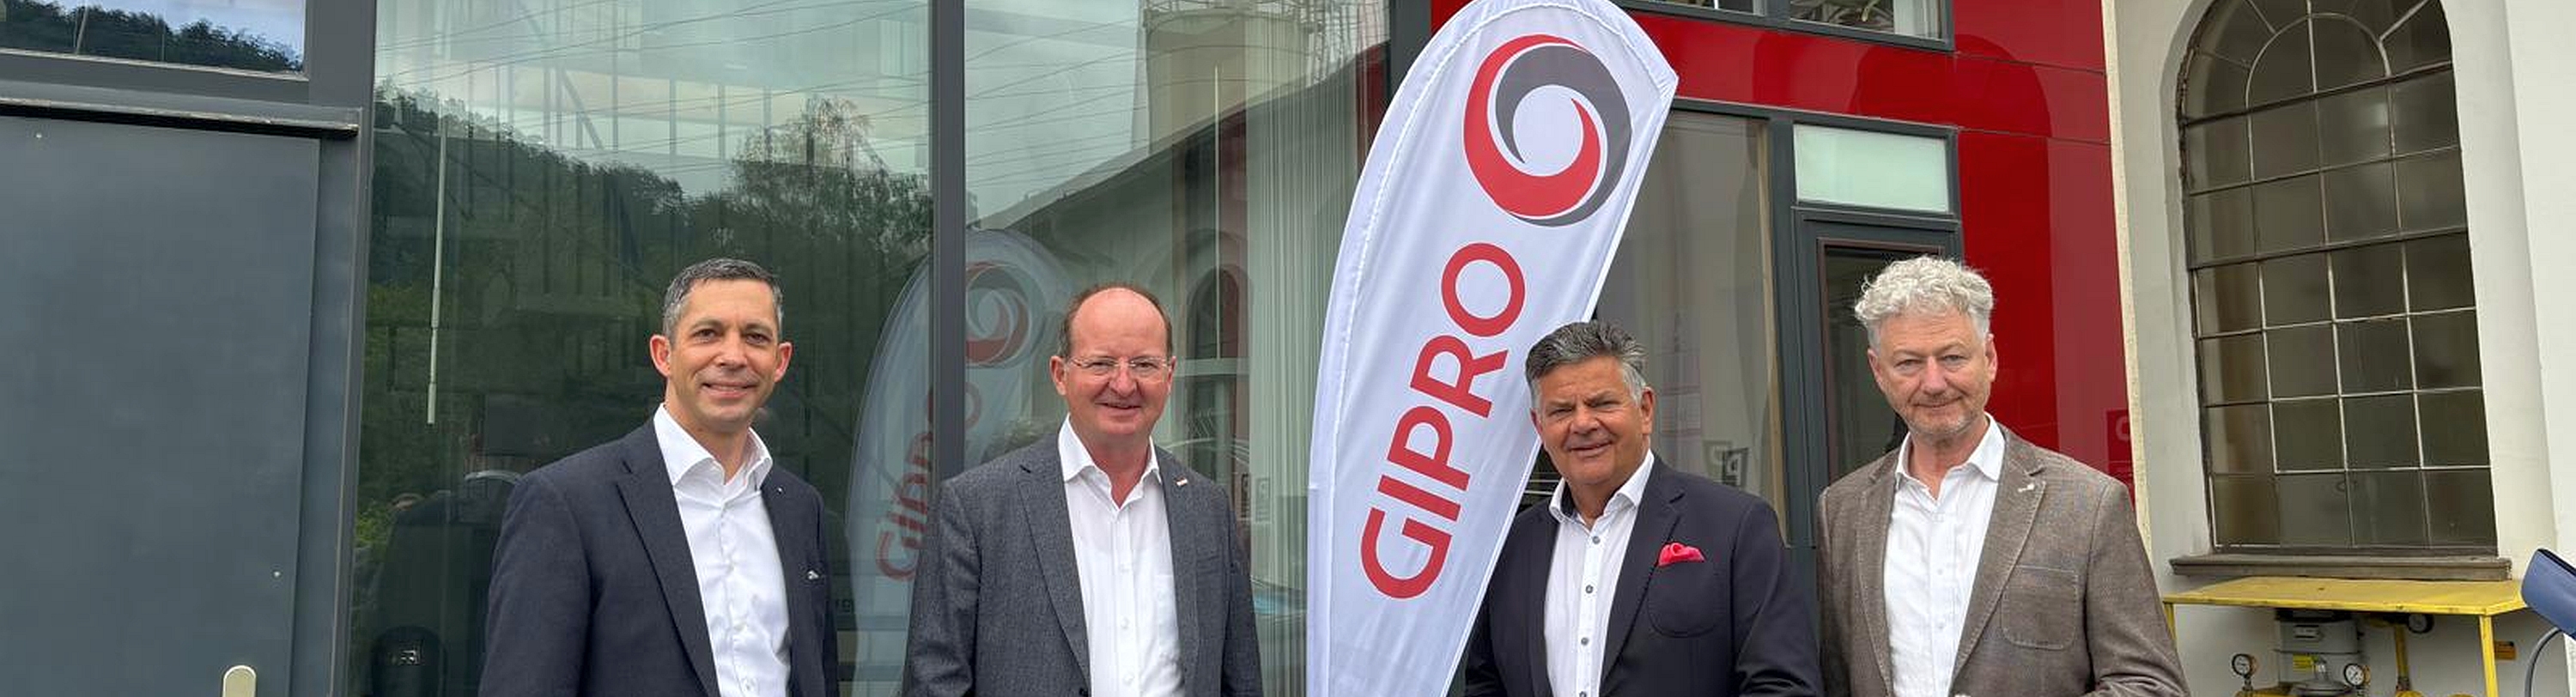 Delegation of the Styrian Chamber of Commerce visits the GIPRO insulator plant